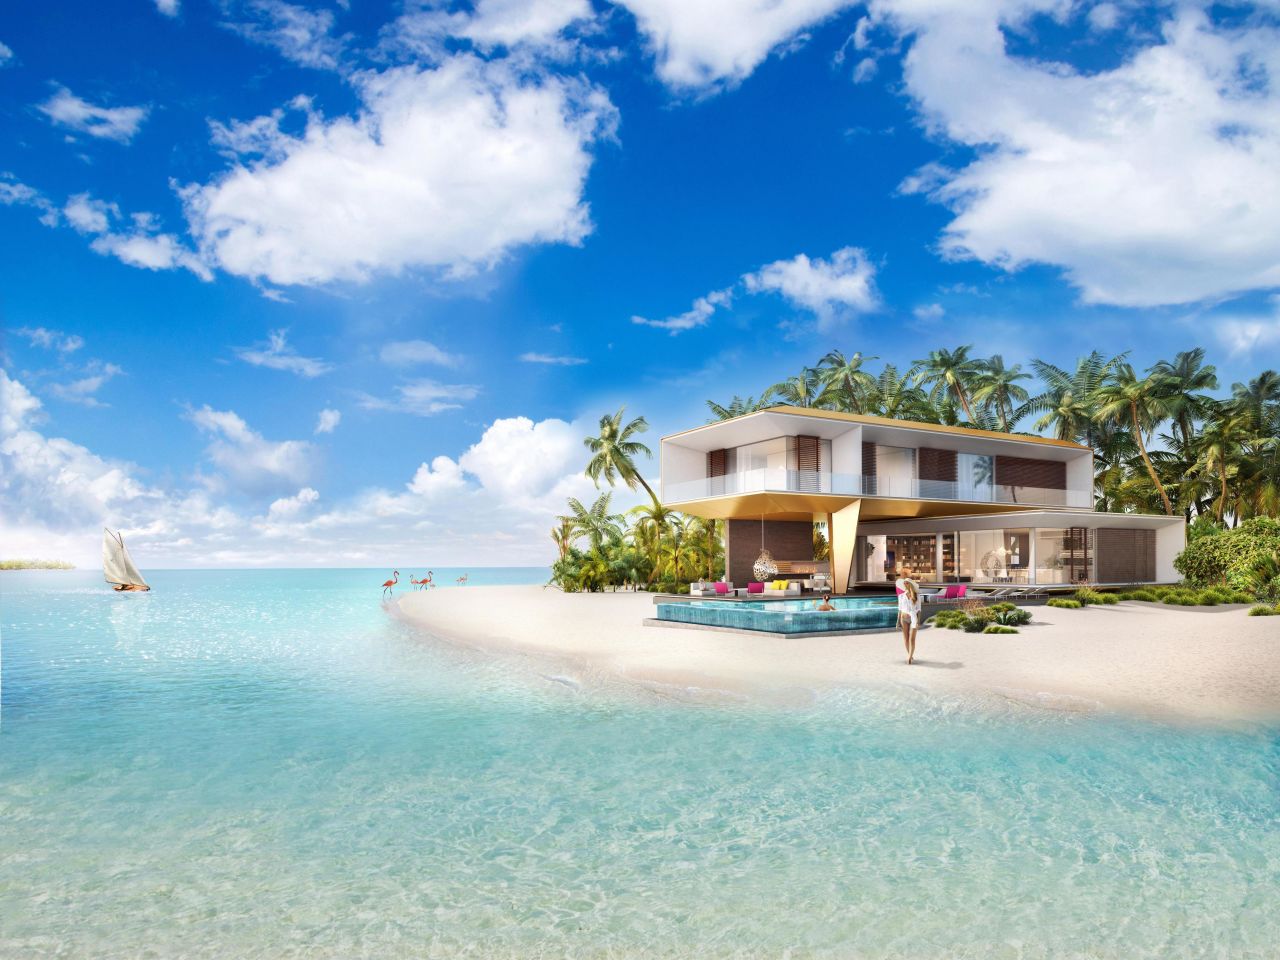 <strong>Germany Island:</strong> Construction is well underway on 32 villas on Germany Island. Kleindienst say there will be 15 six-bedroom villas with their own exterior pools and private beaches, along with 17 four-bedroom villas based around a central lagoon.<br />